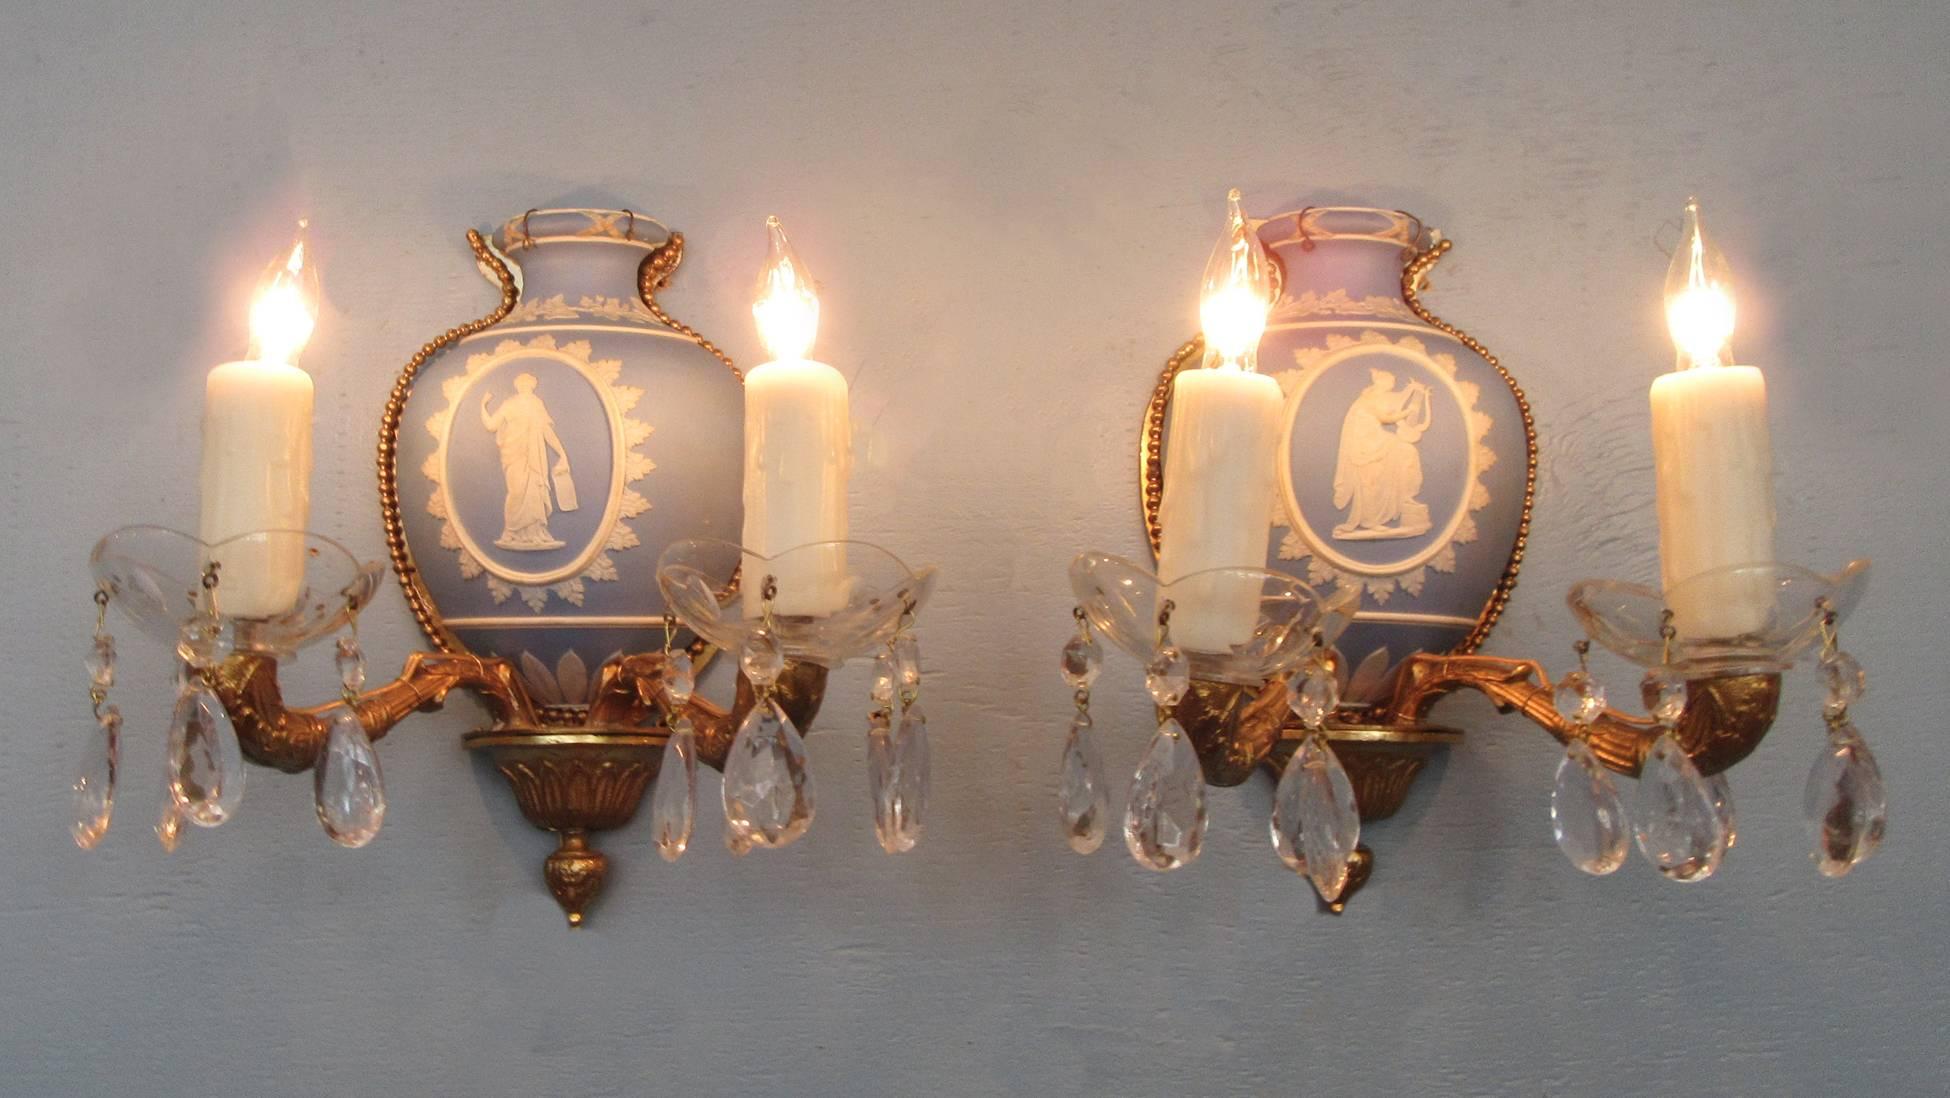 These Wedgwood sconces were made in England during the first half of the 20th century, circa 1910. These sconces feature blue urn-shaped bodies with gilded beaded edges and cameo reliefs. There are two cast-brass arms with crystal bobeches and